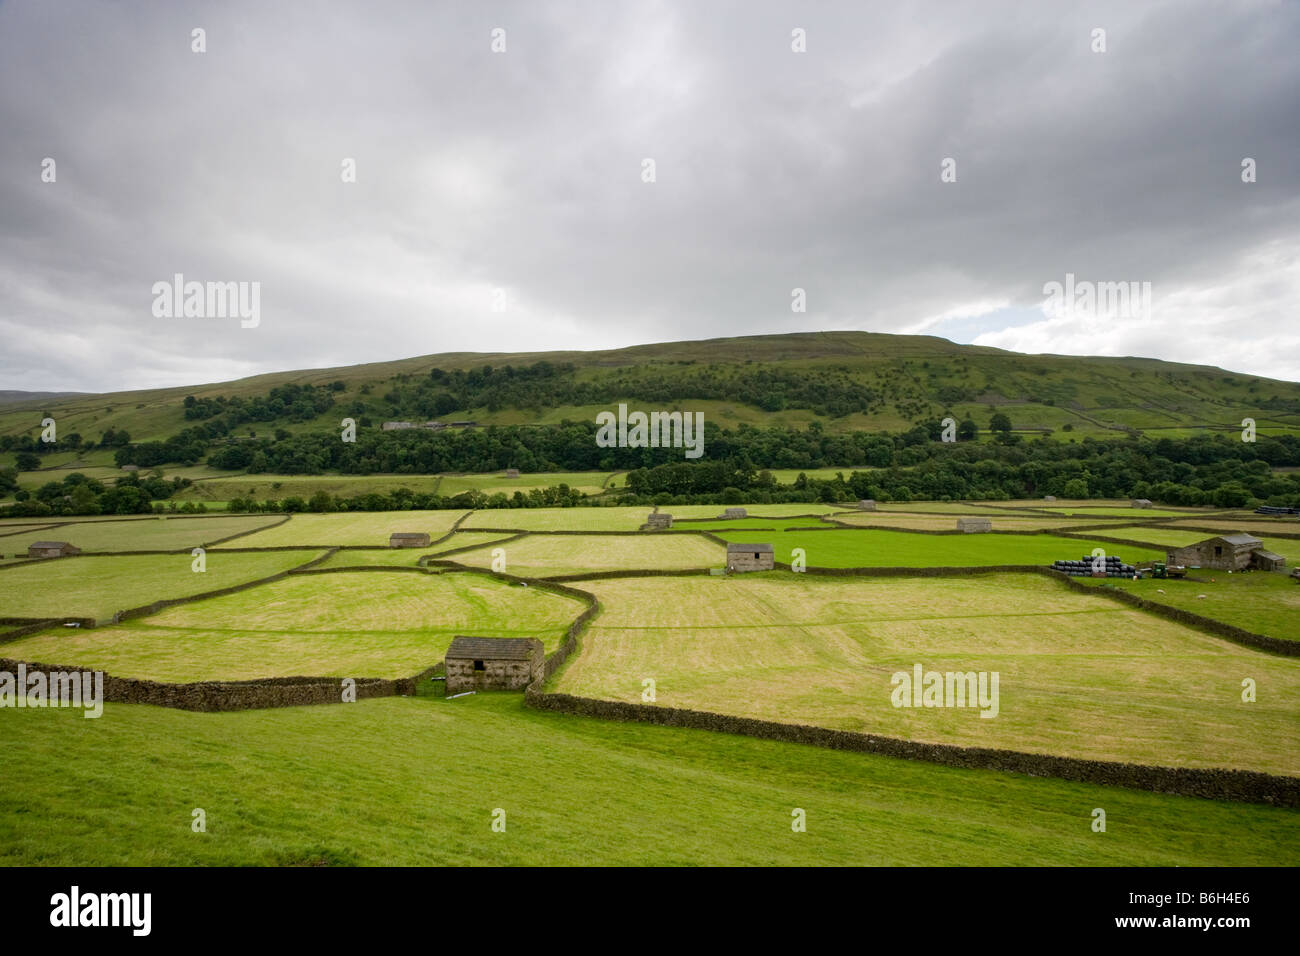 A Yorkshire Dales hill looks down onto a patchwork of fields and connecting barns. Stock Photo